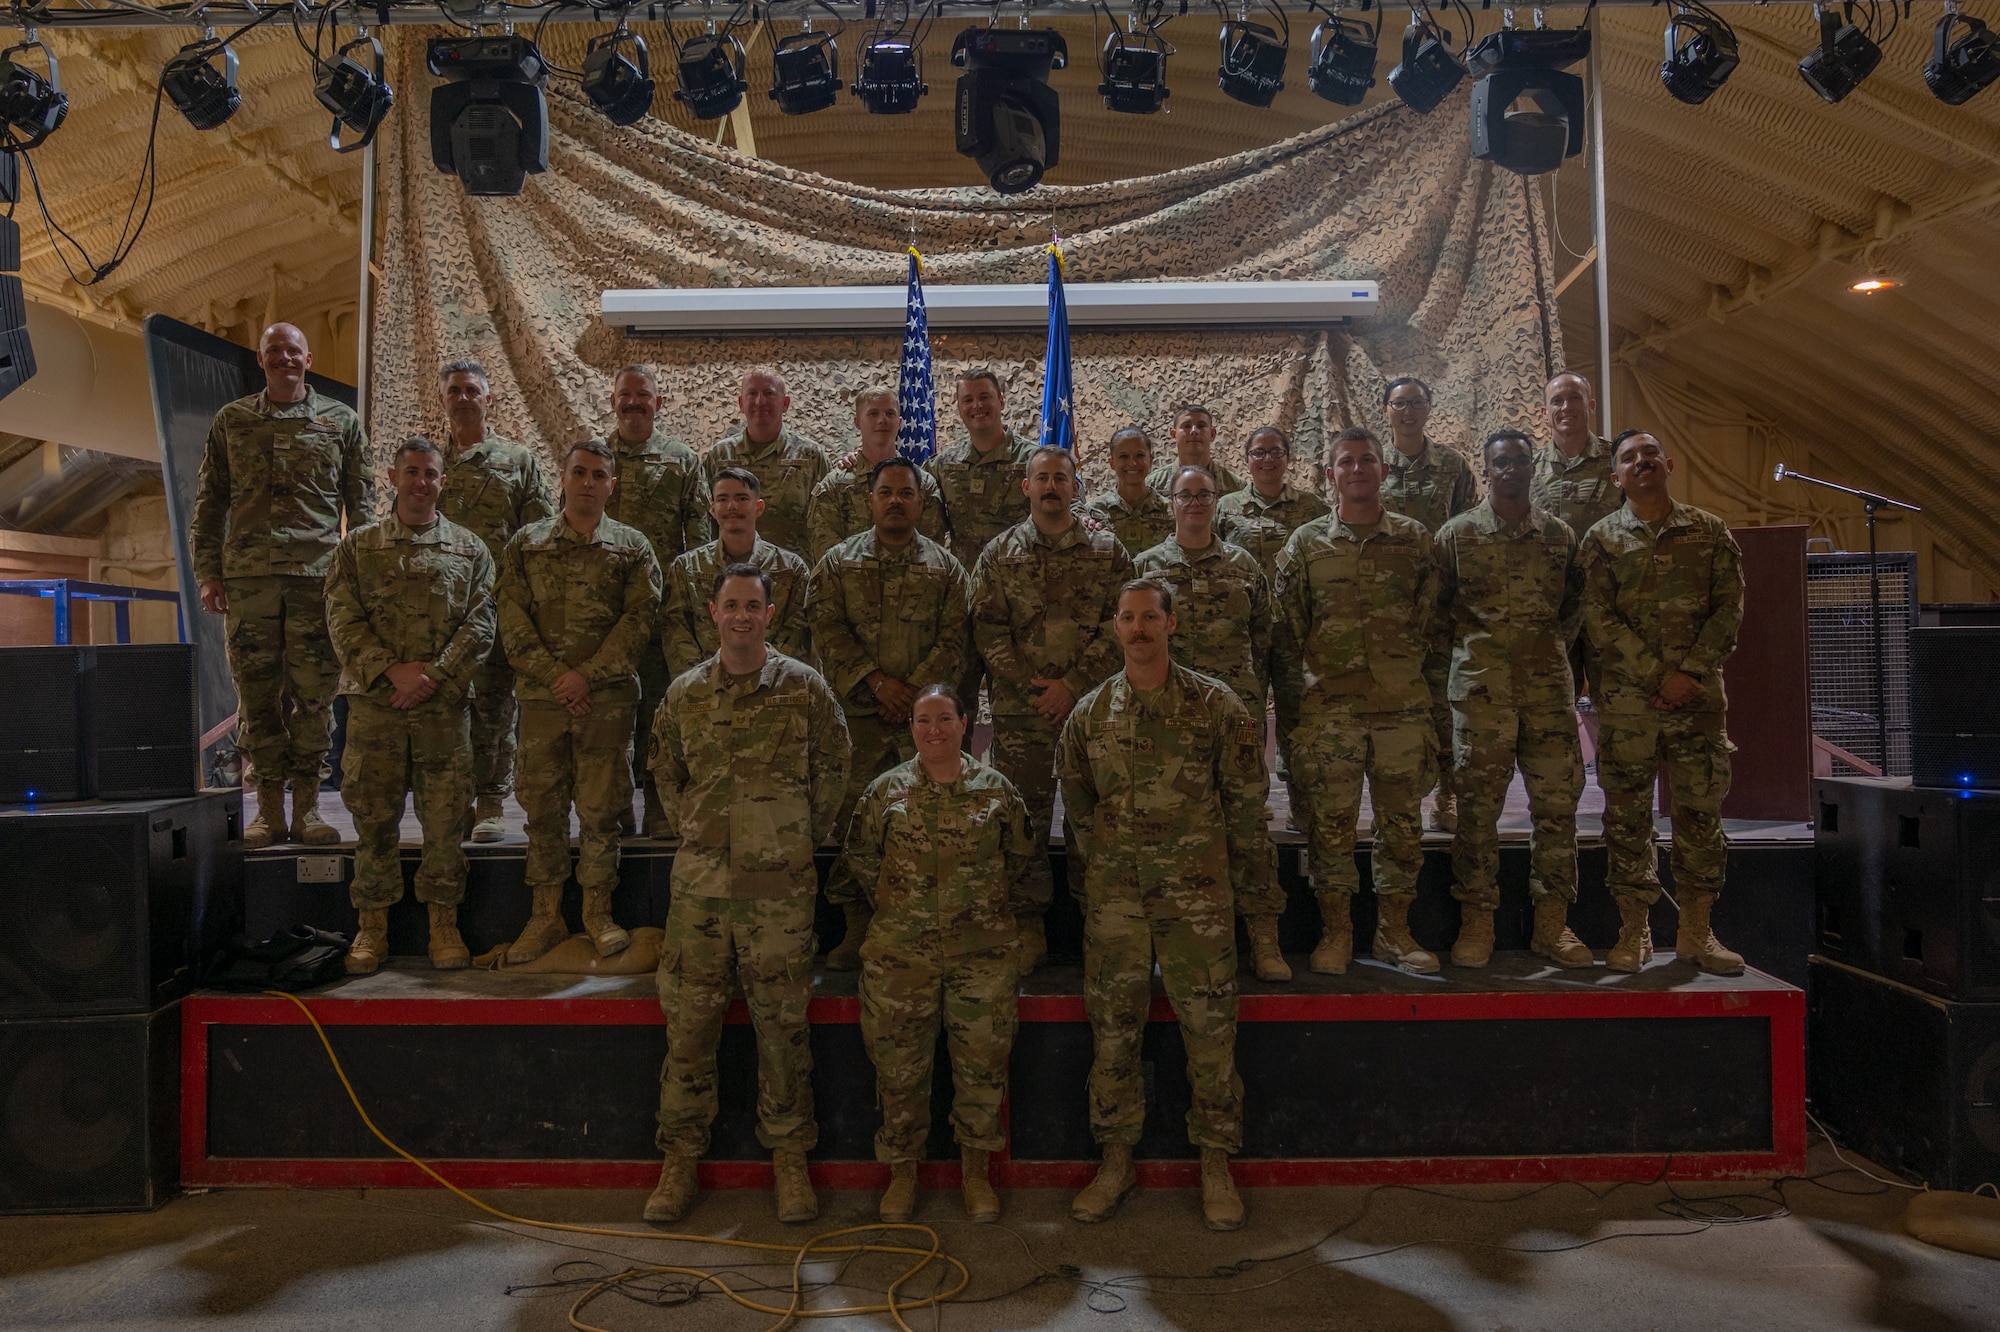 Recent graduates from the 332d Air Expeditionary Wing’s Red Tail University program pose for a group 
photo after their graduation ceremony at an undisclosed location in Southwest Asia on October 5, 2022. 
The curriculum options RTU provides is meant to encourage Airmen to seek 
learning and personal growth opportunities beyond textbook-style professional military 
education. (U.S. Air Force photo by Tech. Sgt. Richard Mekkri)